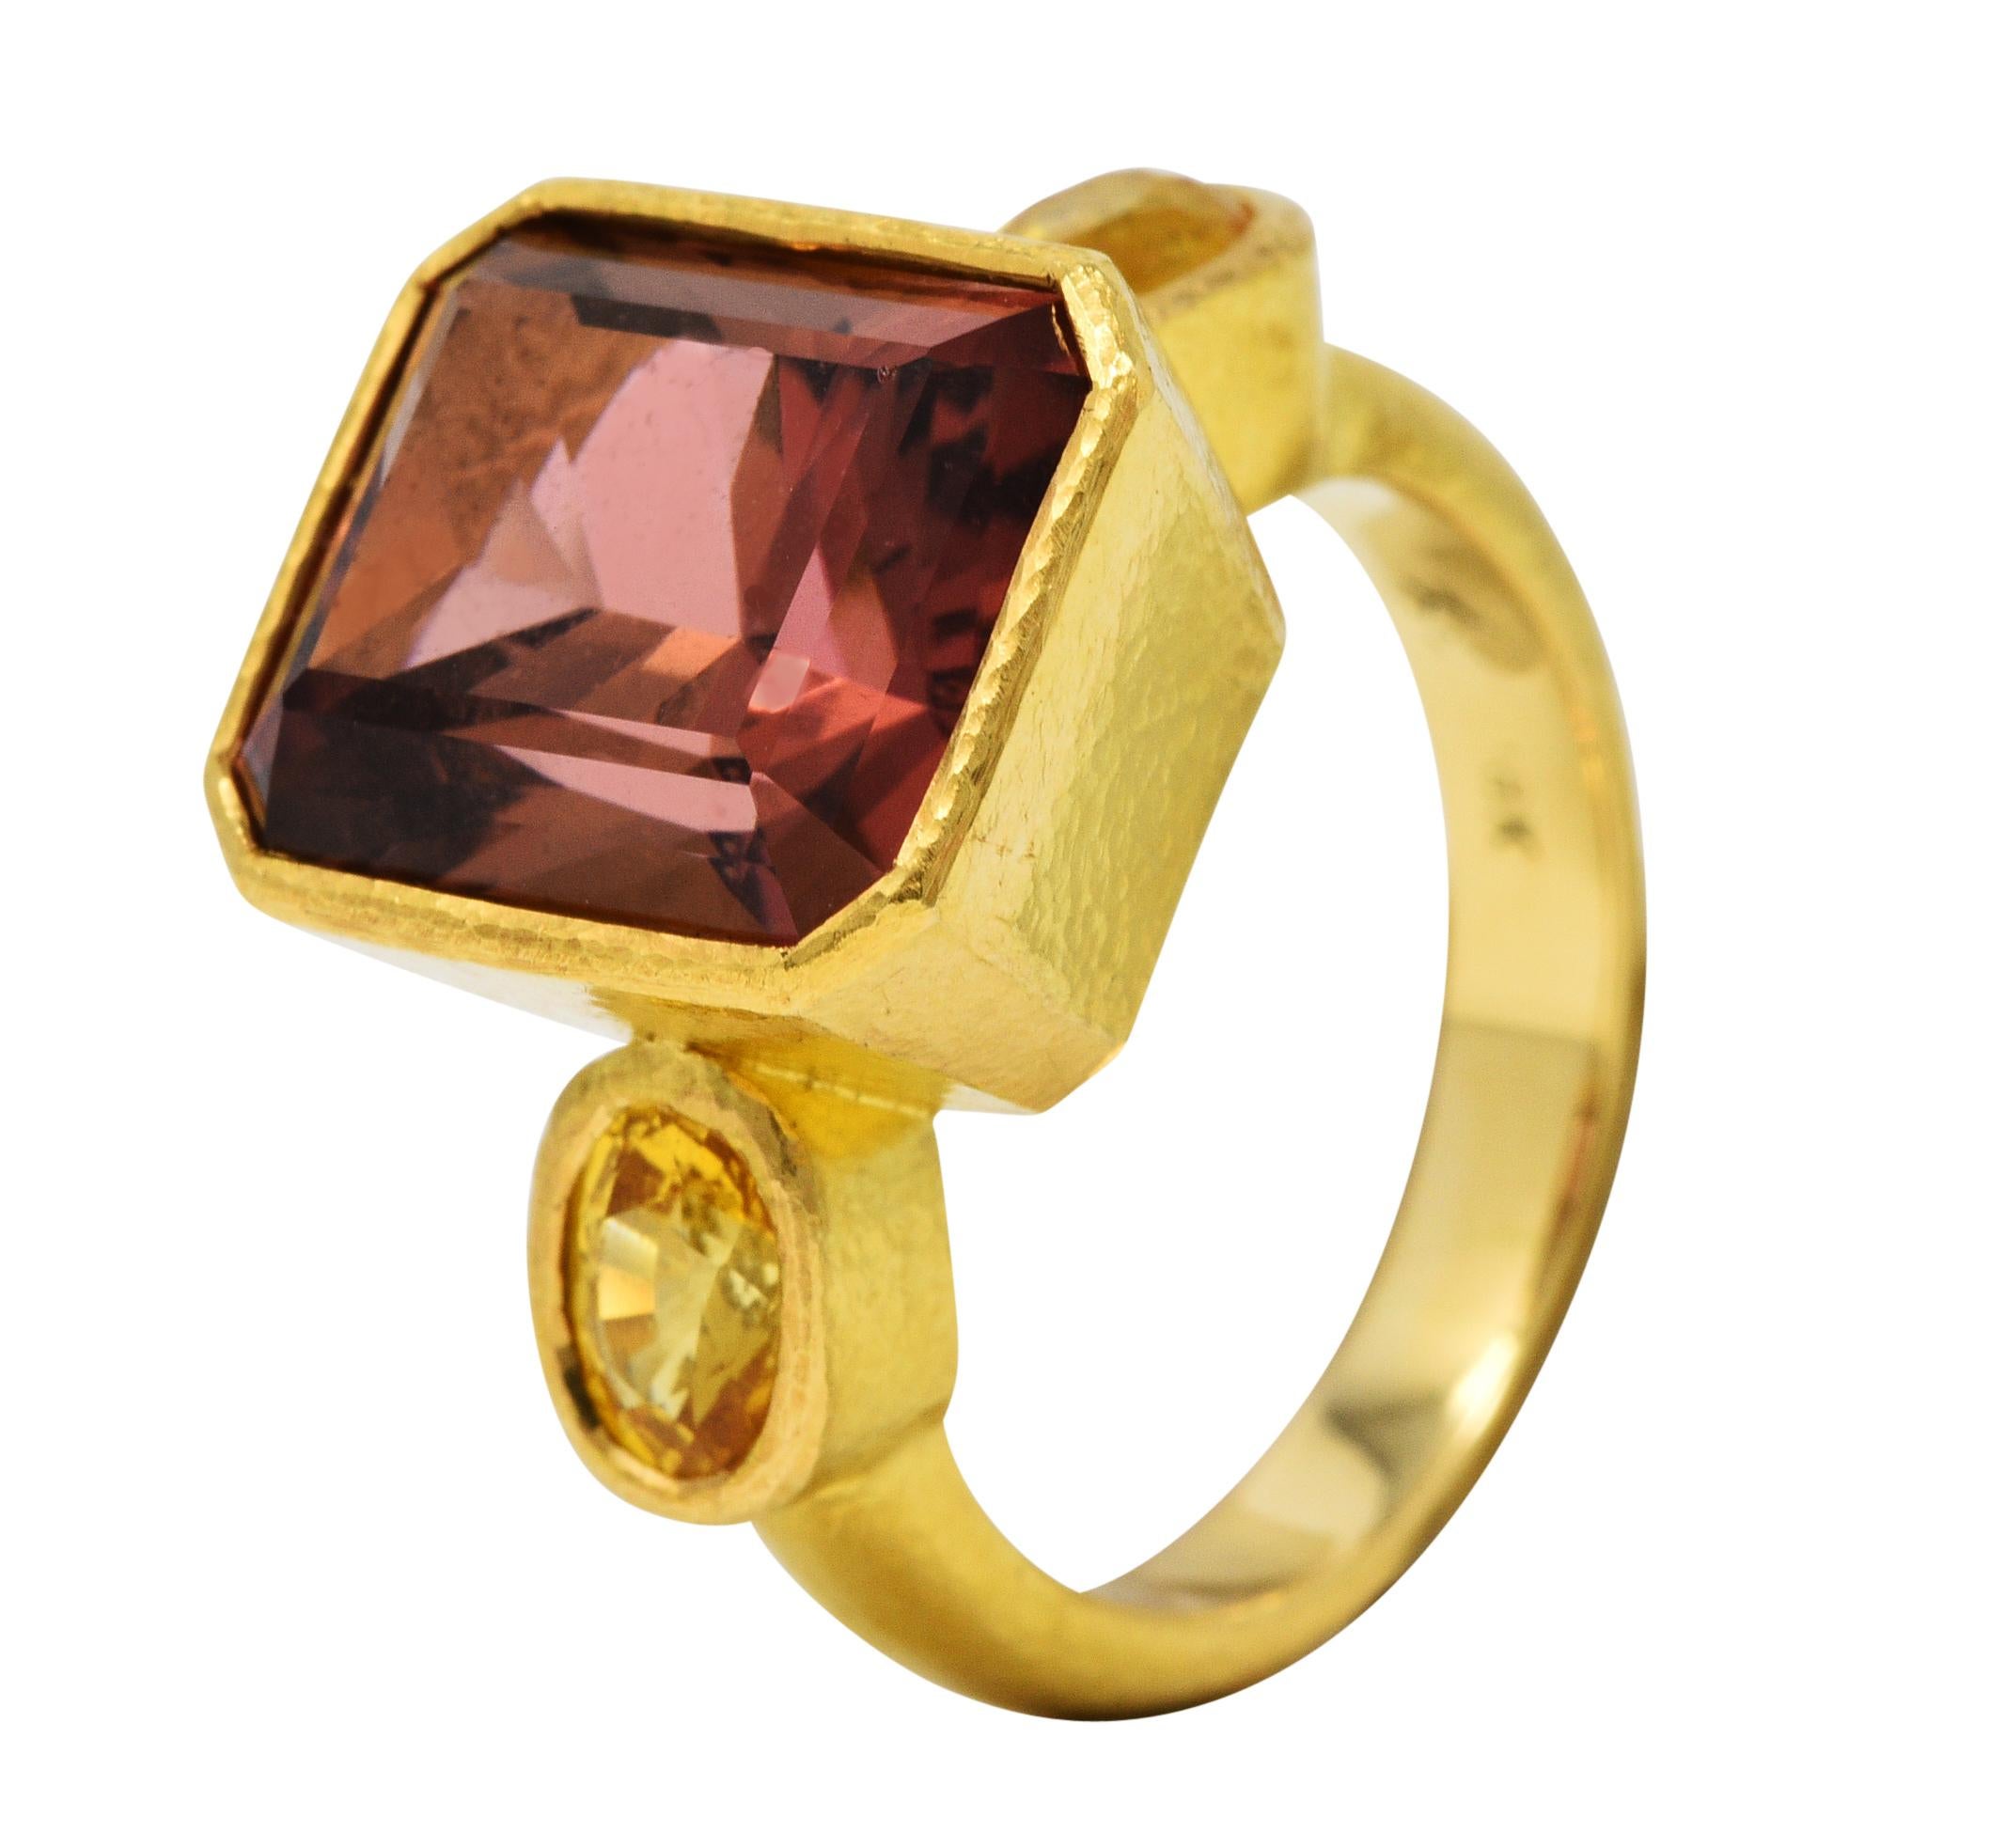 Centering an emerald cut tourmaline weighing approximately 8.25 carats

Remarkable transparent with strong peachy pink color

Flanked by oval cut yellow sapphires, very well matched, while weighing in total approximately 1.40 carats

All are bezel